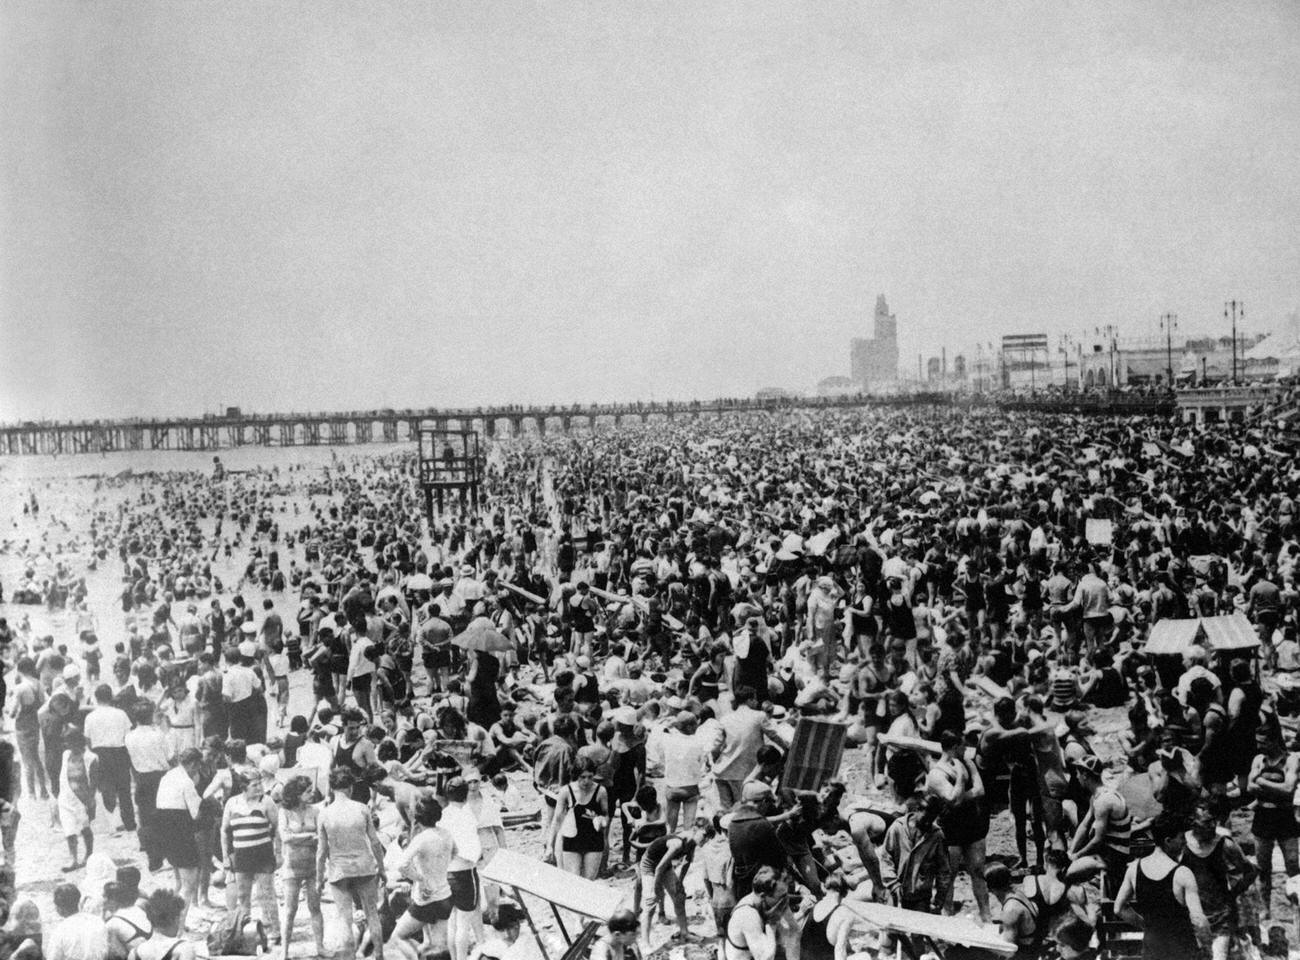 Coney Island Beach Packed During Heatwave, July 16, 1931